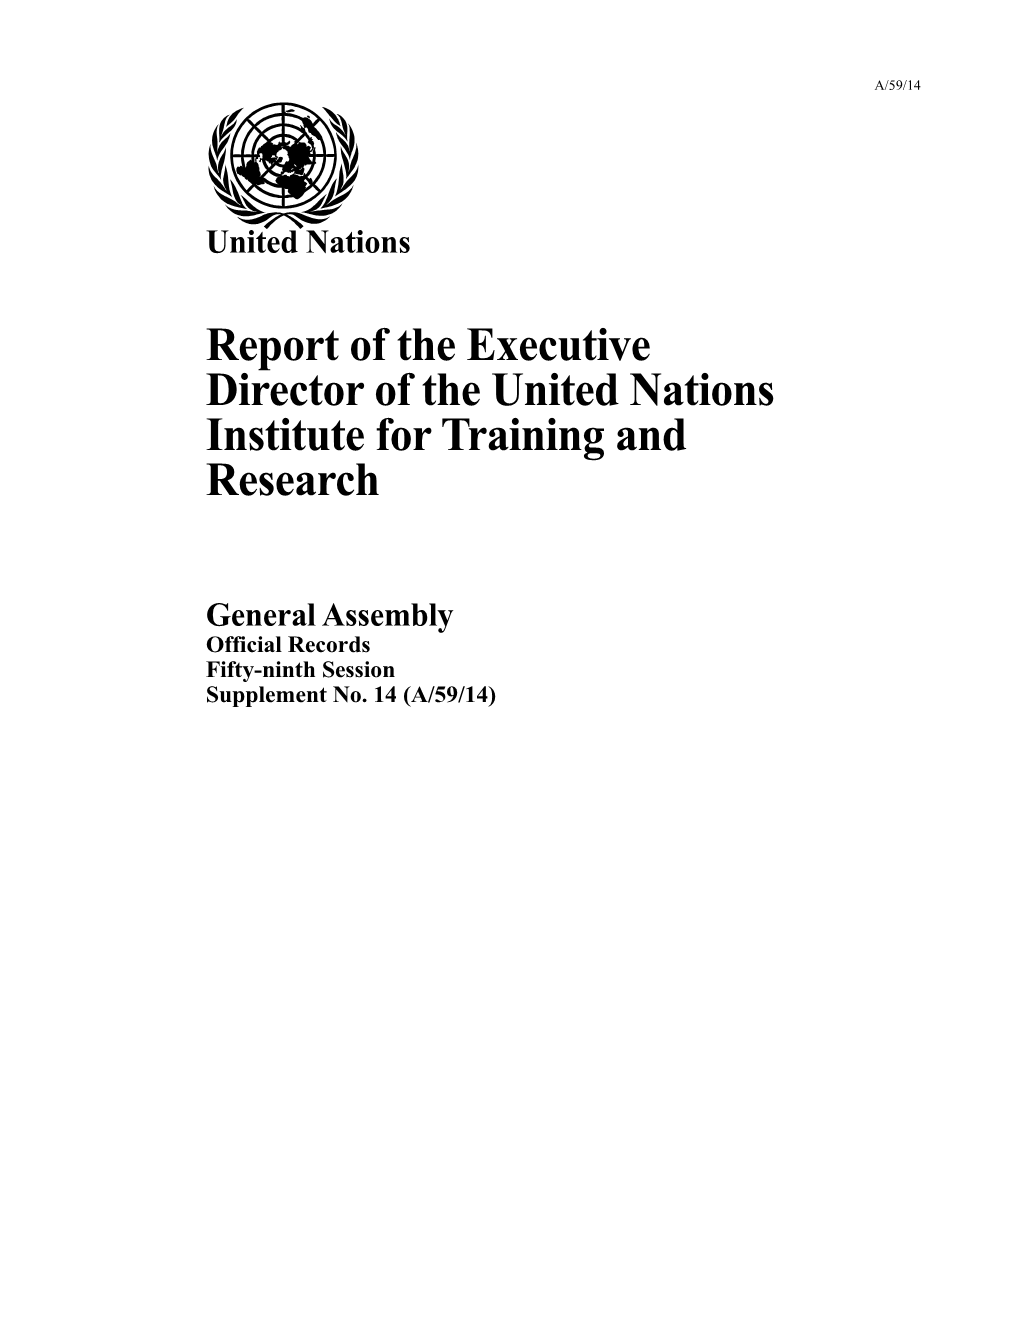 Report of the Executive Director of the United Nations Institute for Training and Research